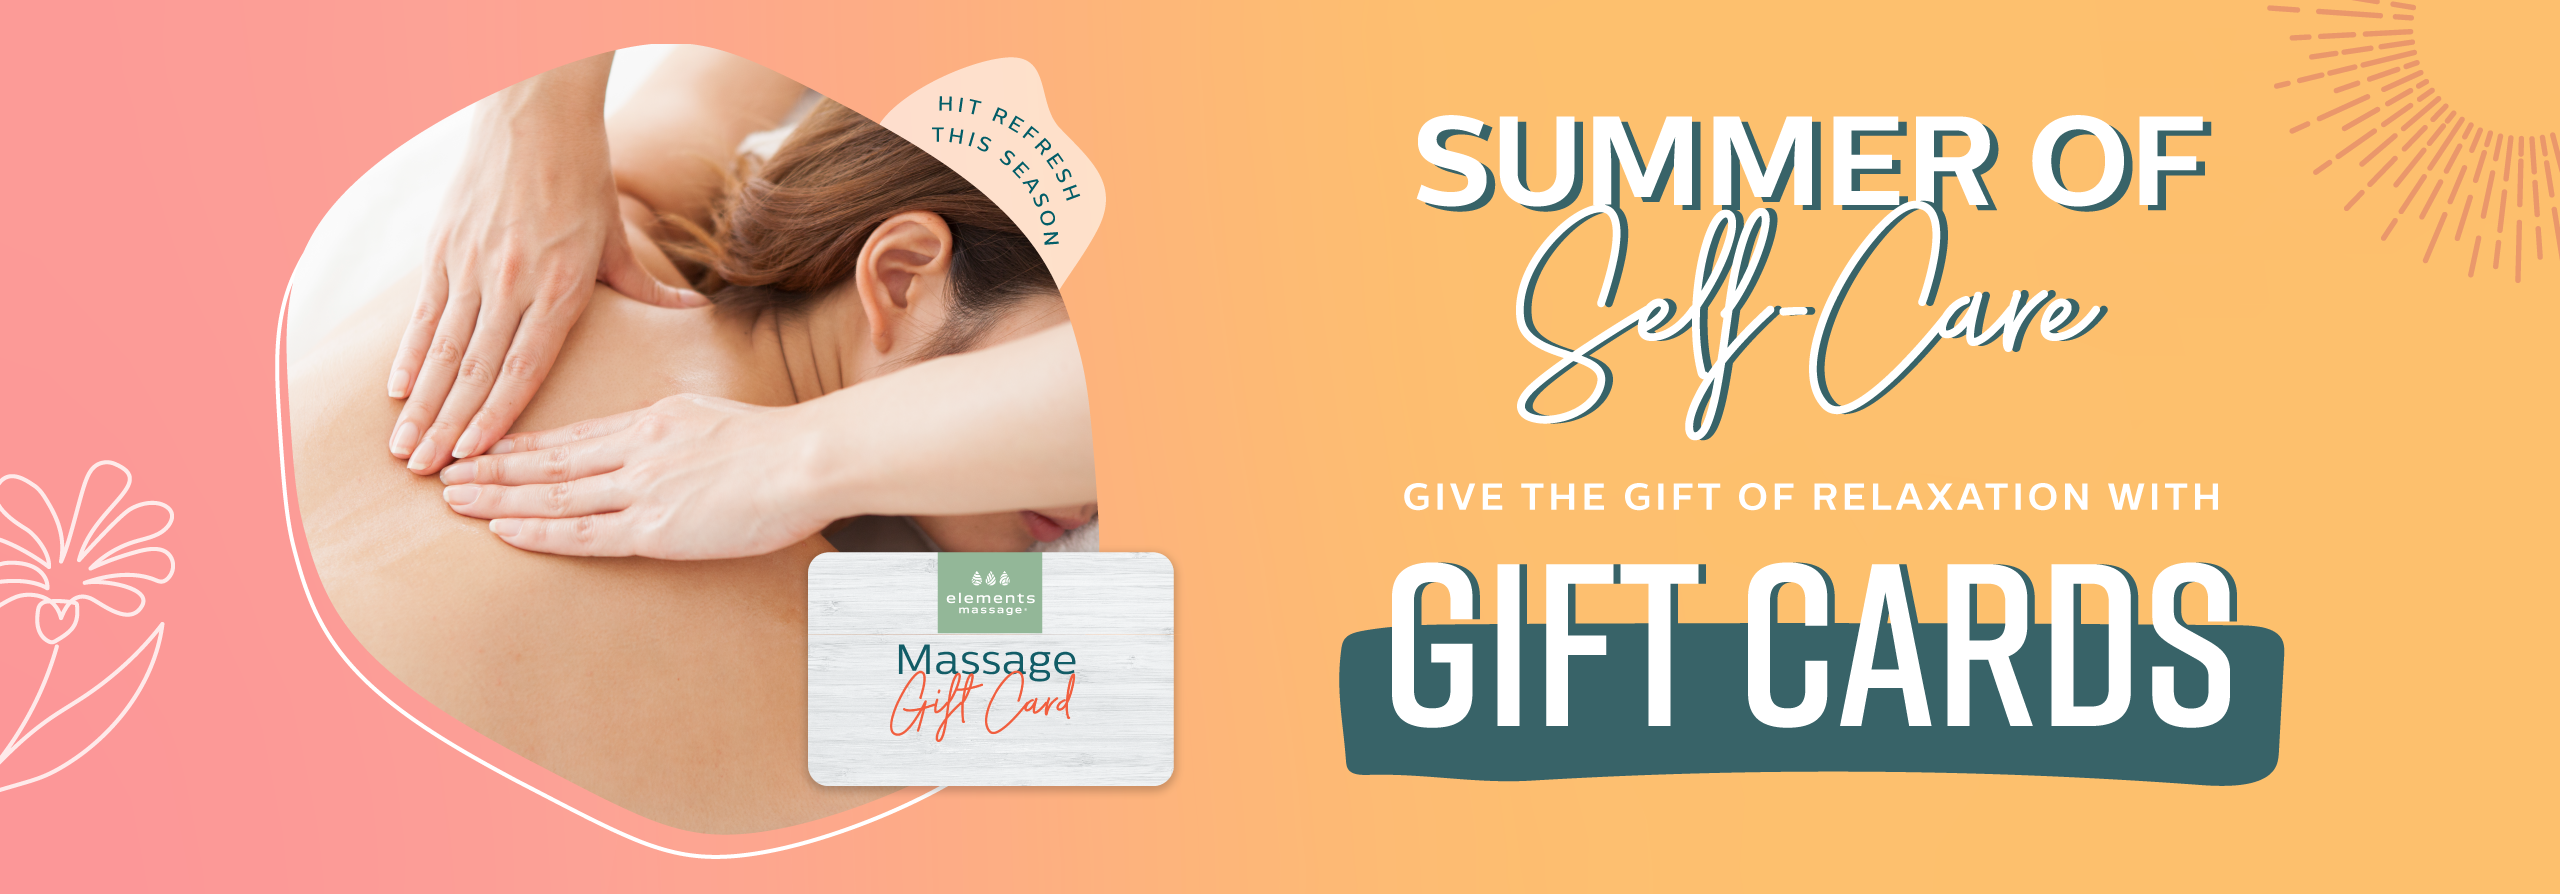 Summer of self care gift cards: give the gift of relaxation with gift cards!